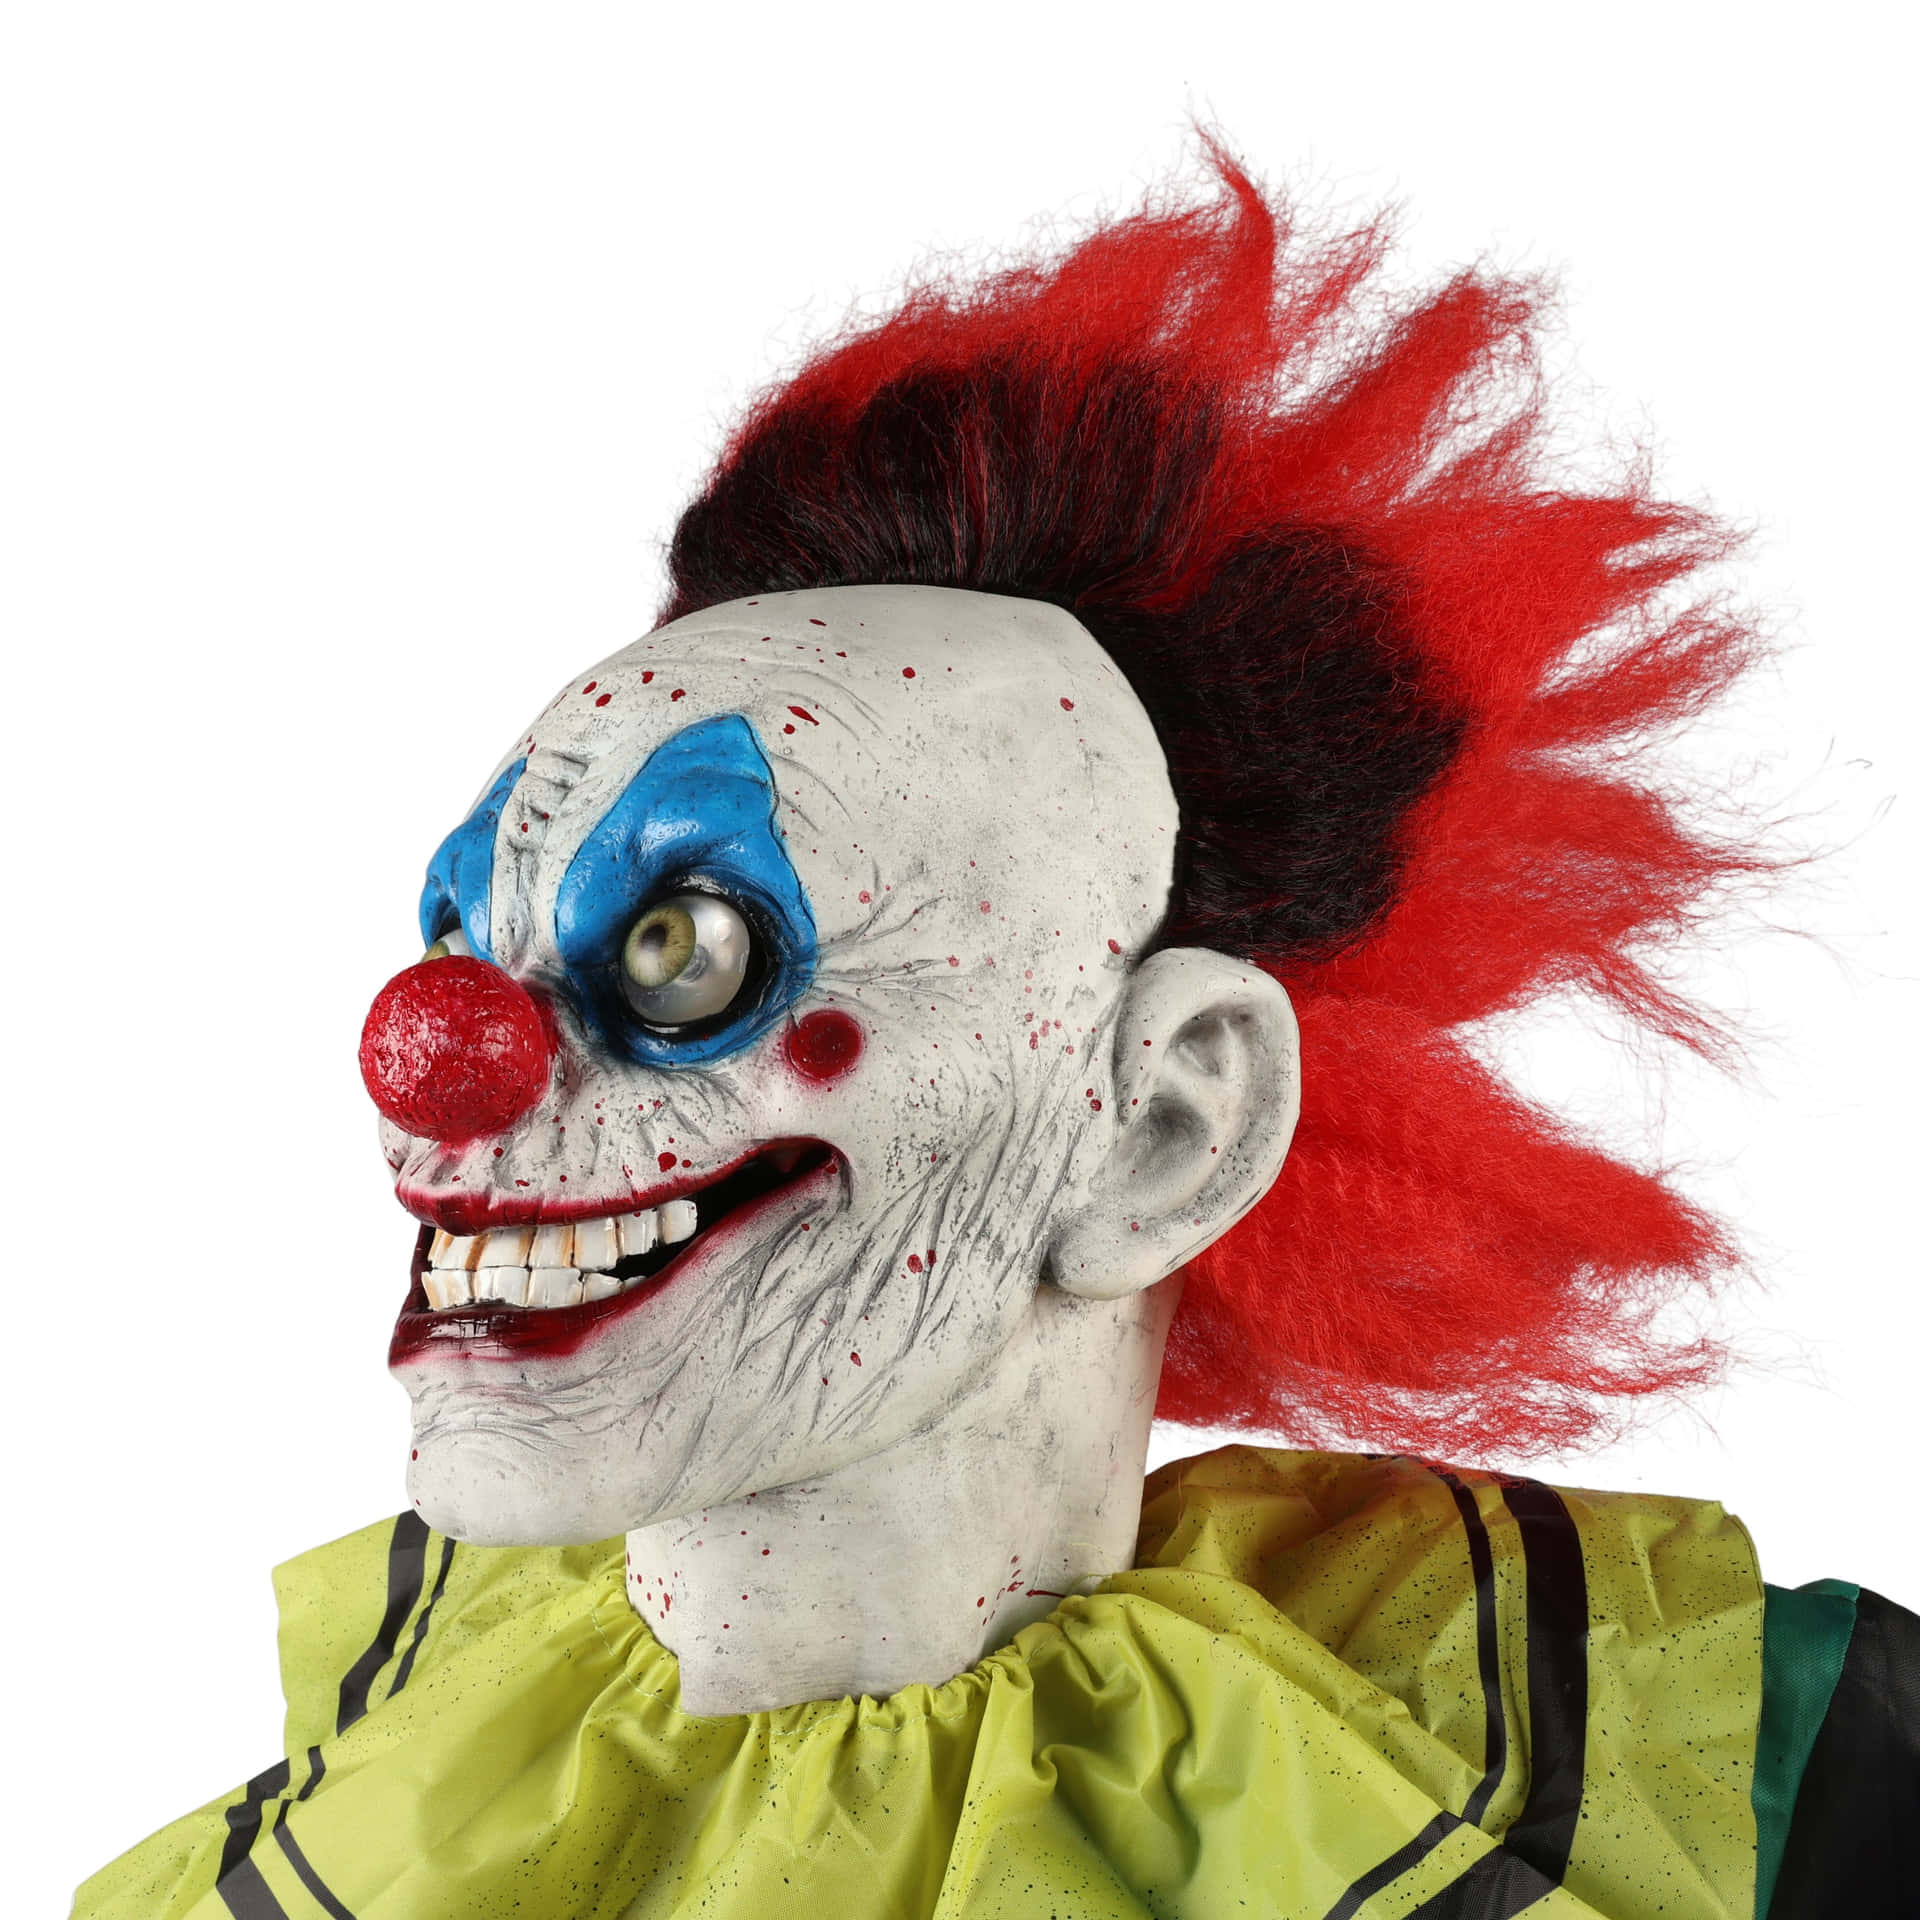 Scary Clown White Makeup Pictures